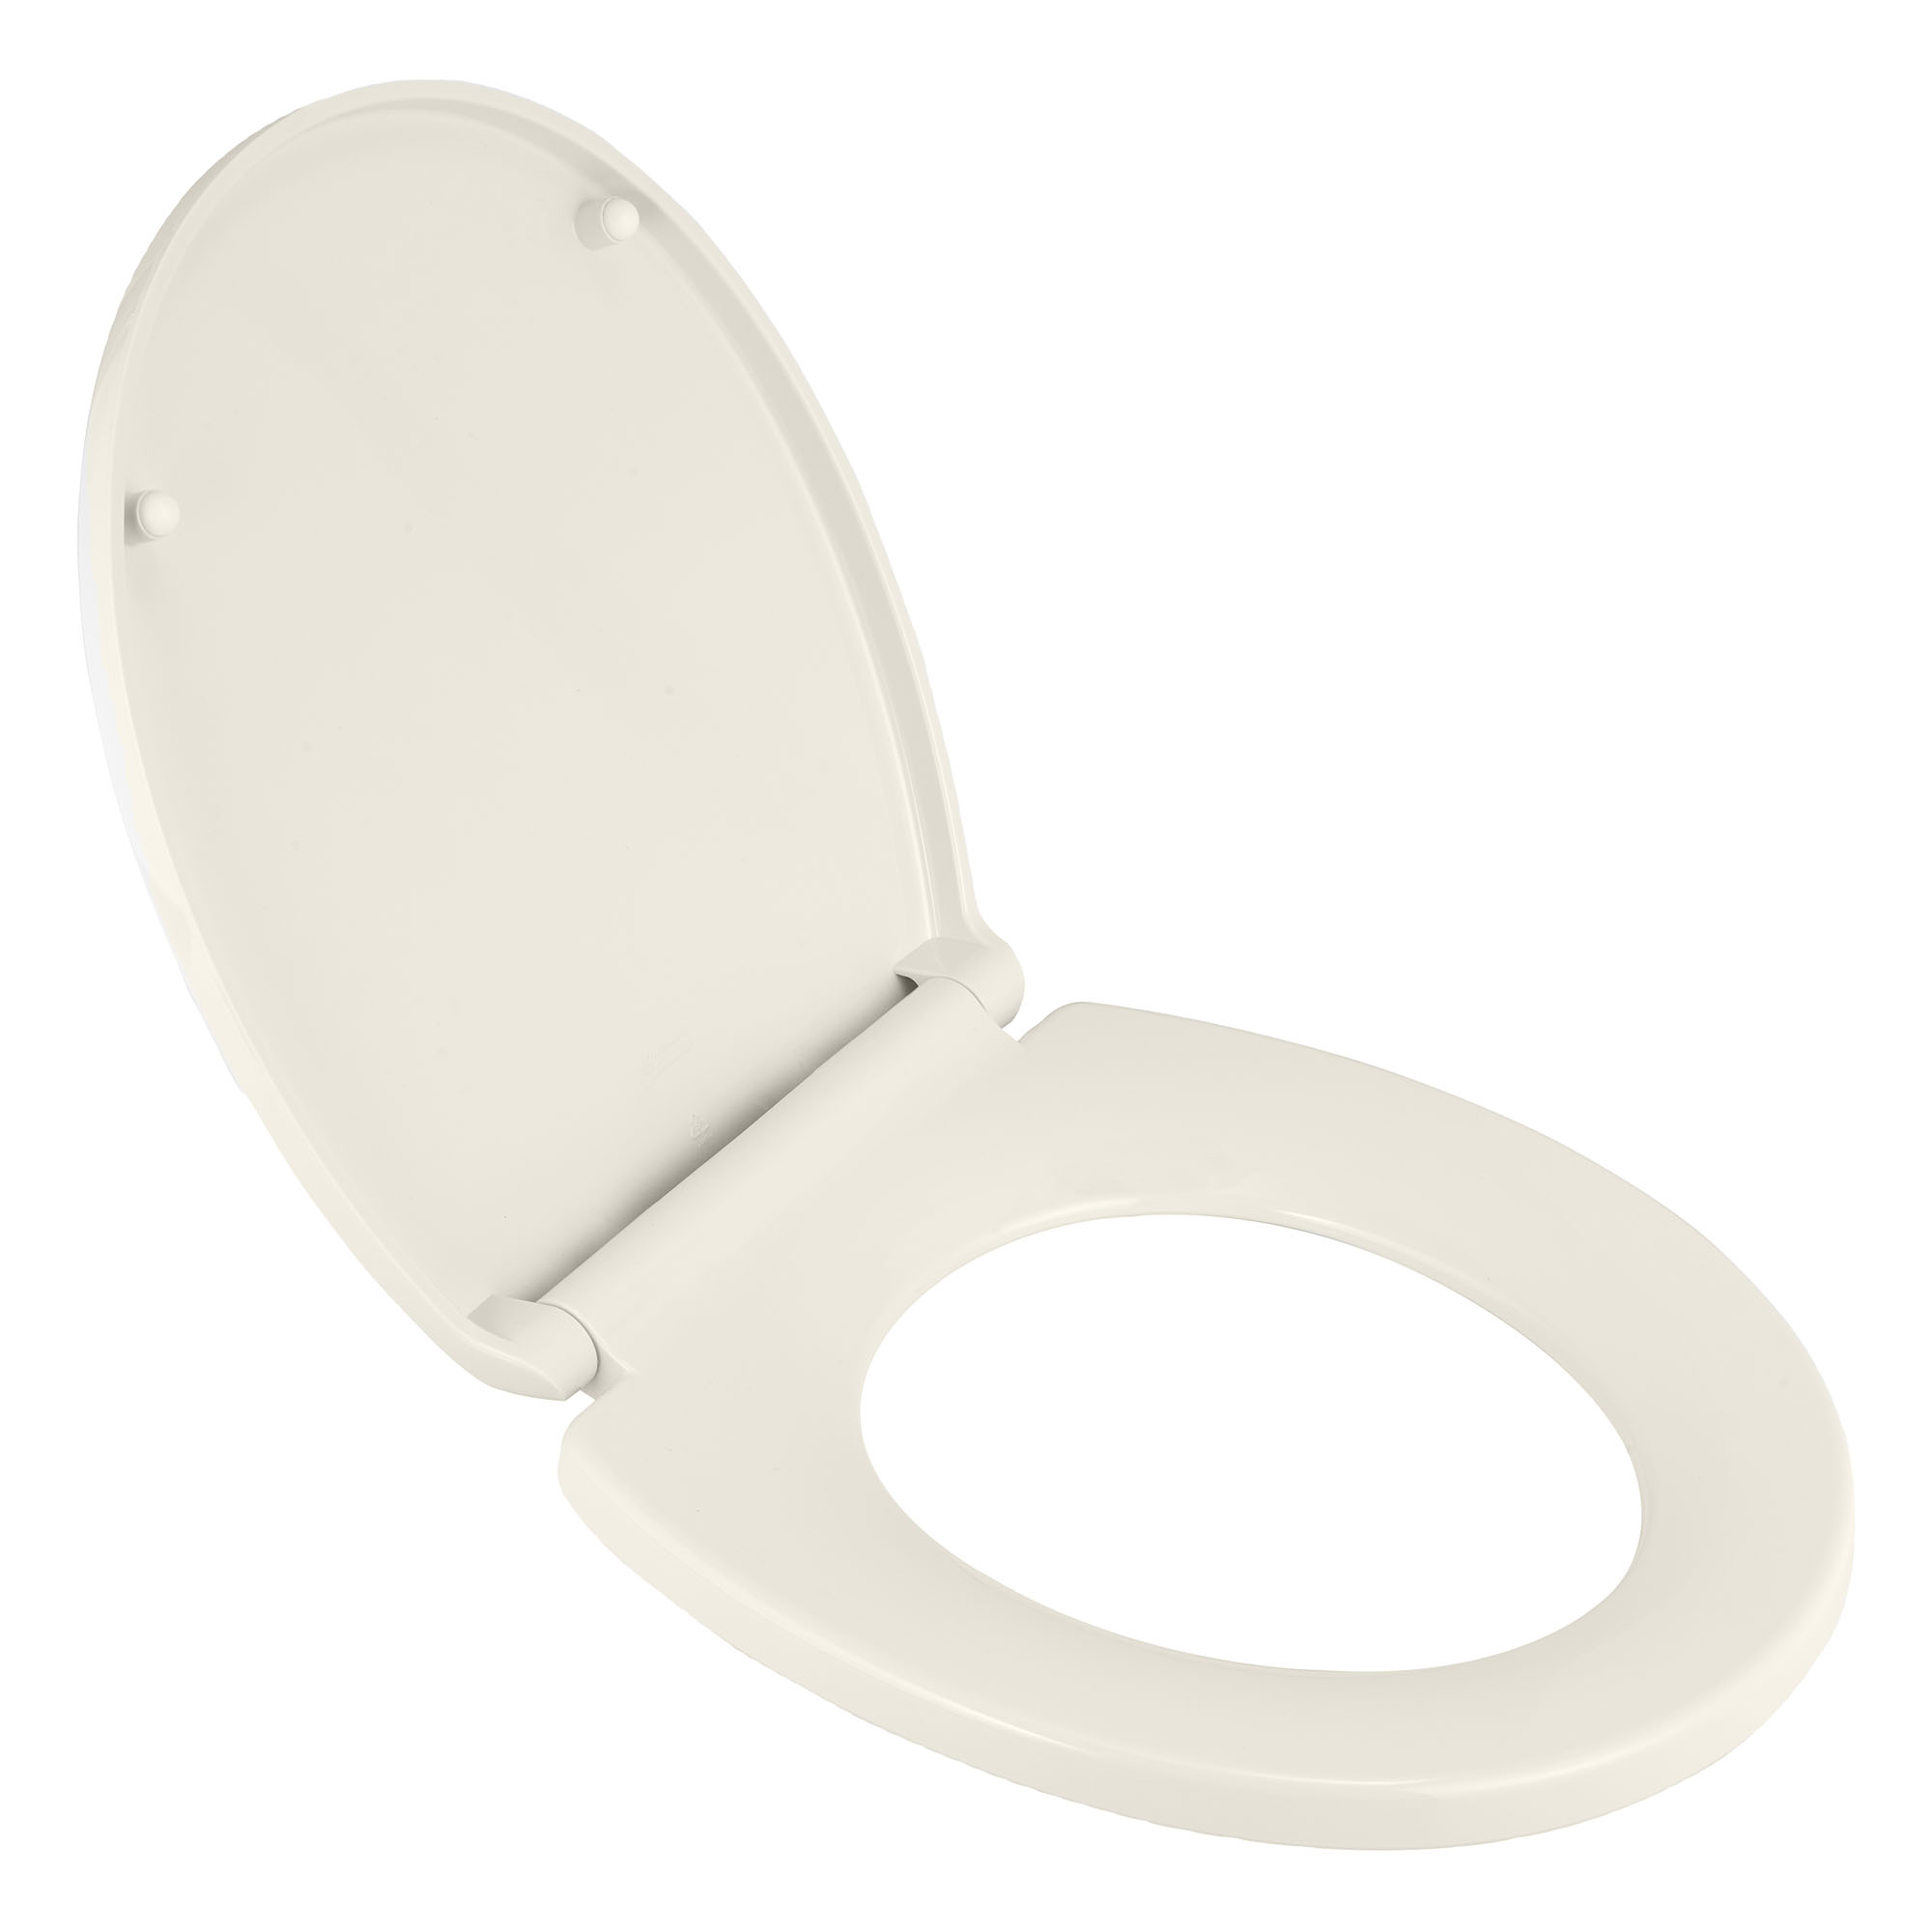 Transitional Slow-Close & Easy Lift-Off Round Front Toilet Seat